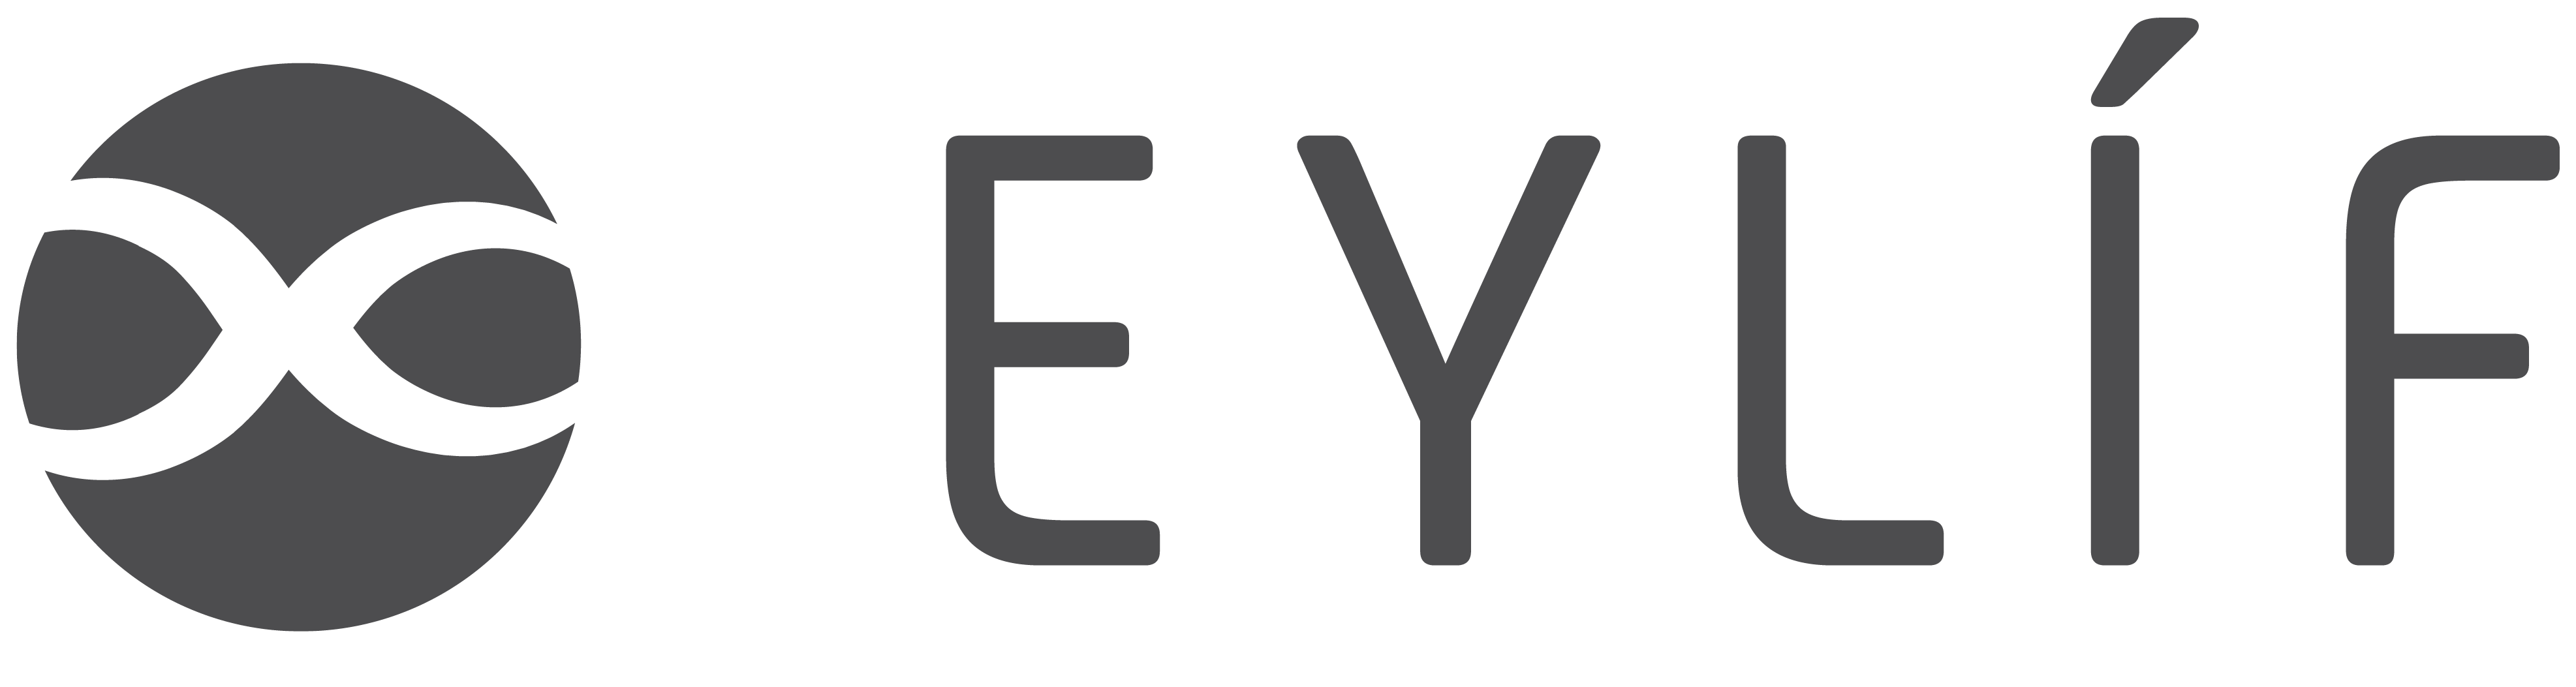 Eylíf is one of the twelve start-ups that were selected as the “Most exciting project for 2022”